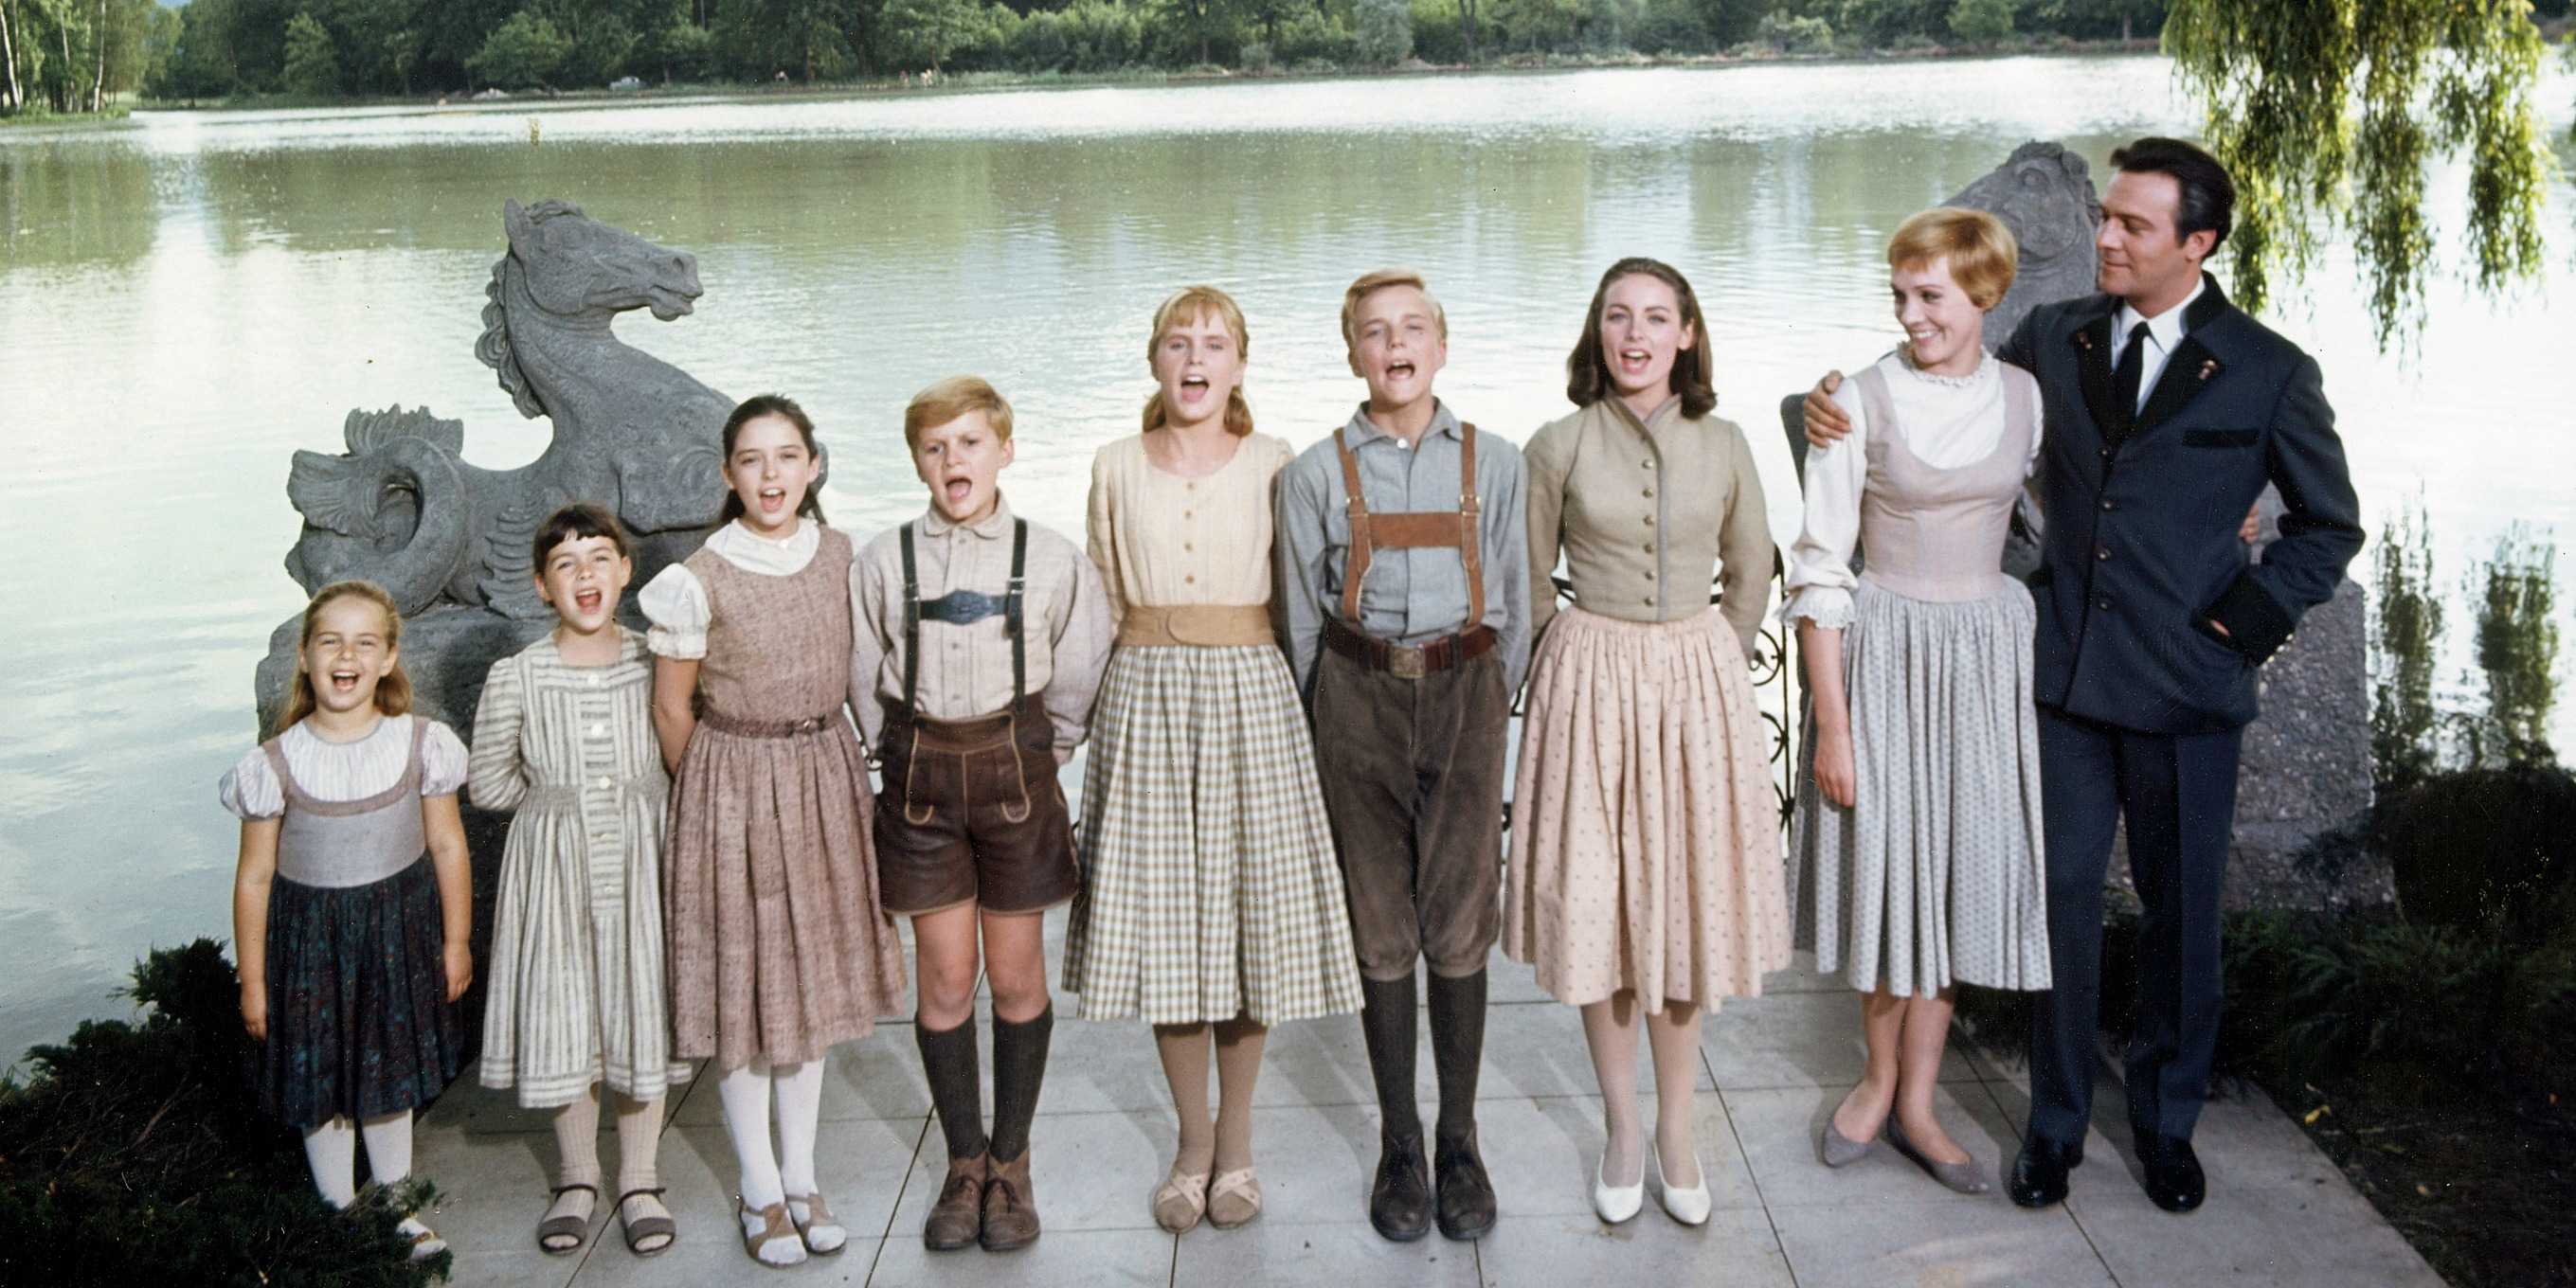 Where are they now: the kids from 'The Sound of Music'